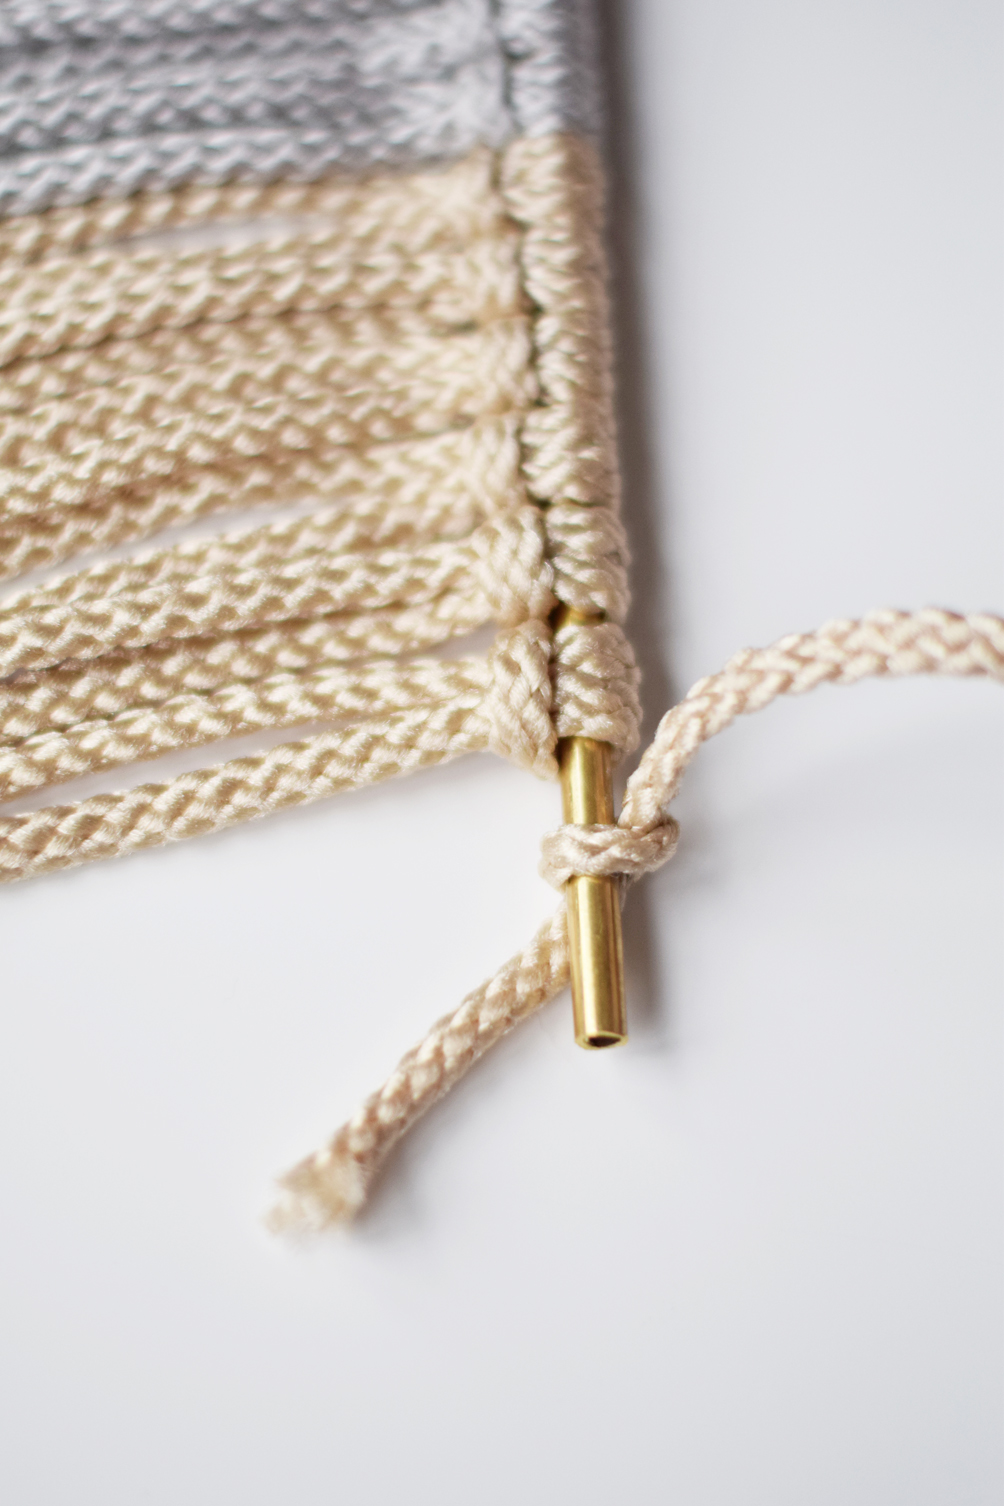 lifestyle blogger Leslie Musser shares an easy diy macrame wall hanging to update your home decor on one brass fox